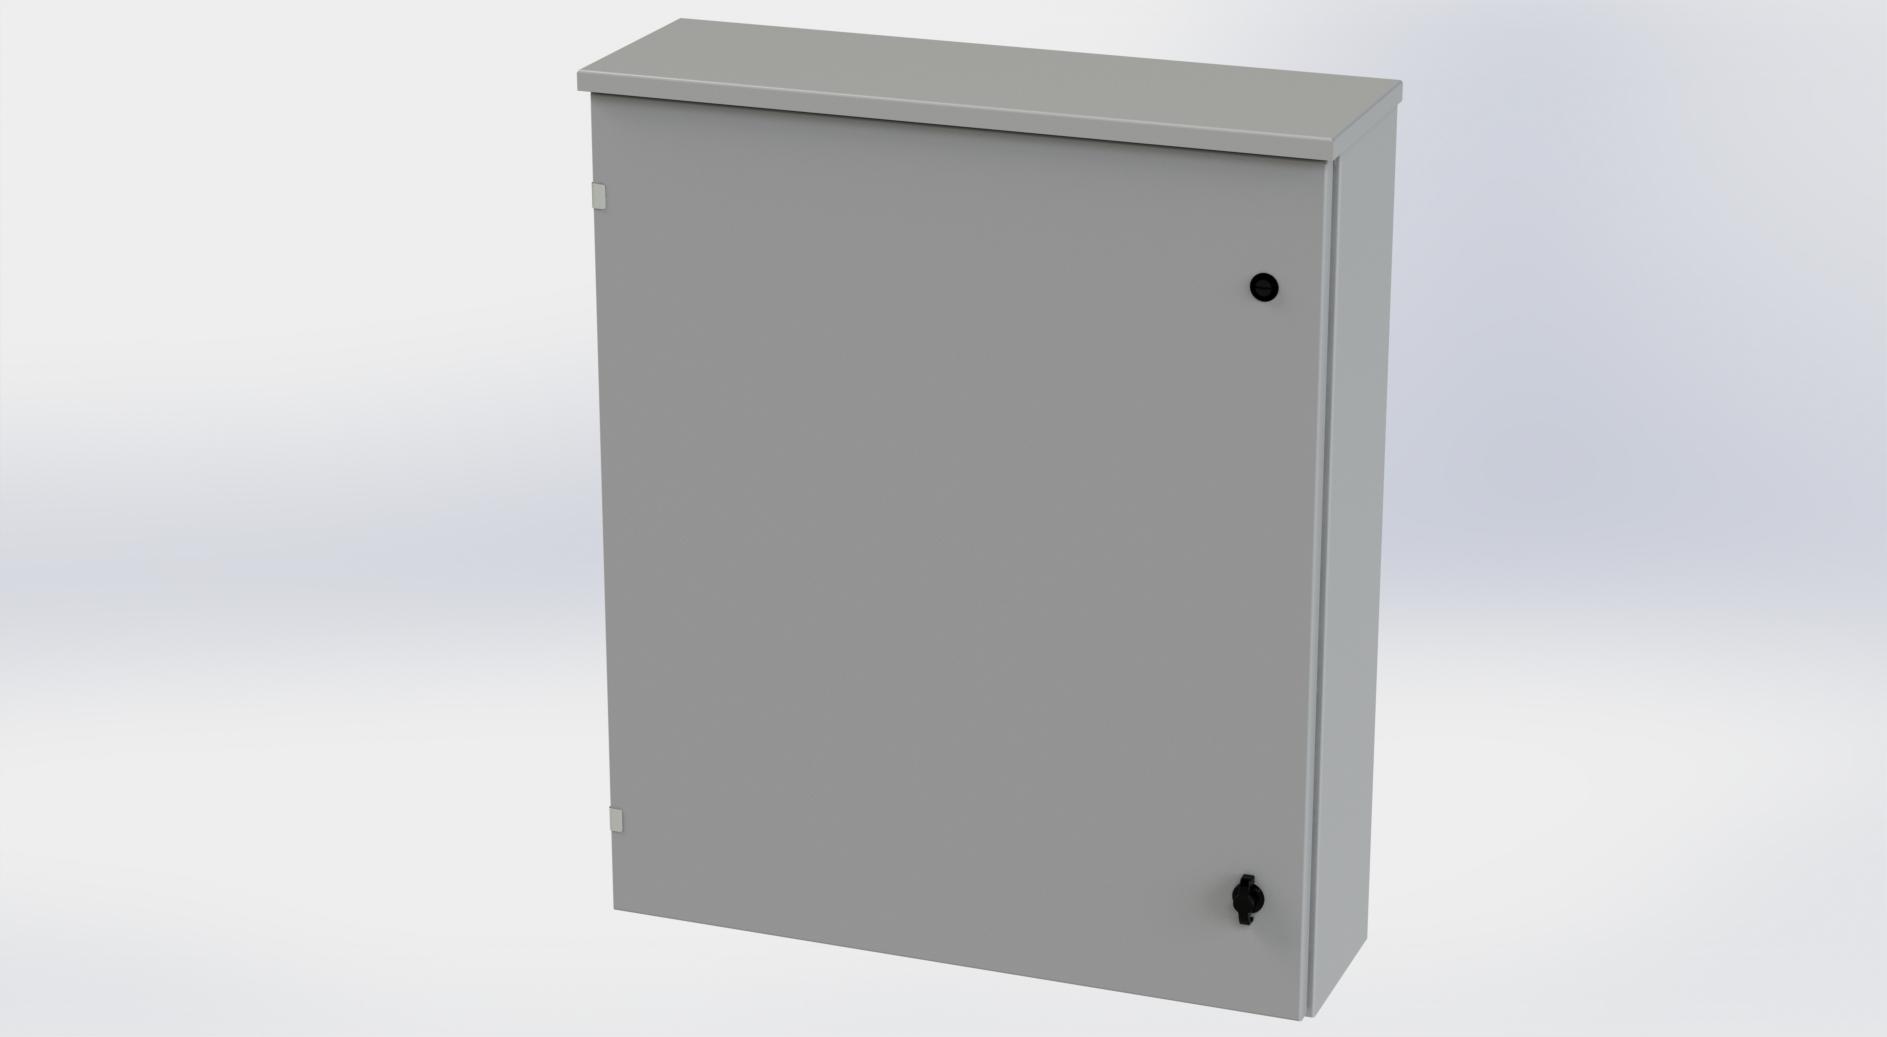 Saginaw Control SCE-36R3008LP Type-3R Hinged Cover Enclosure, Height:36.00", Width:30.00", Depth:8.00", ANSI-61 gray powder coating inside and out. Optional sub-panels are powder coated white.